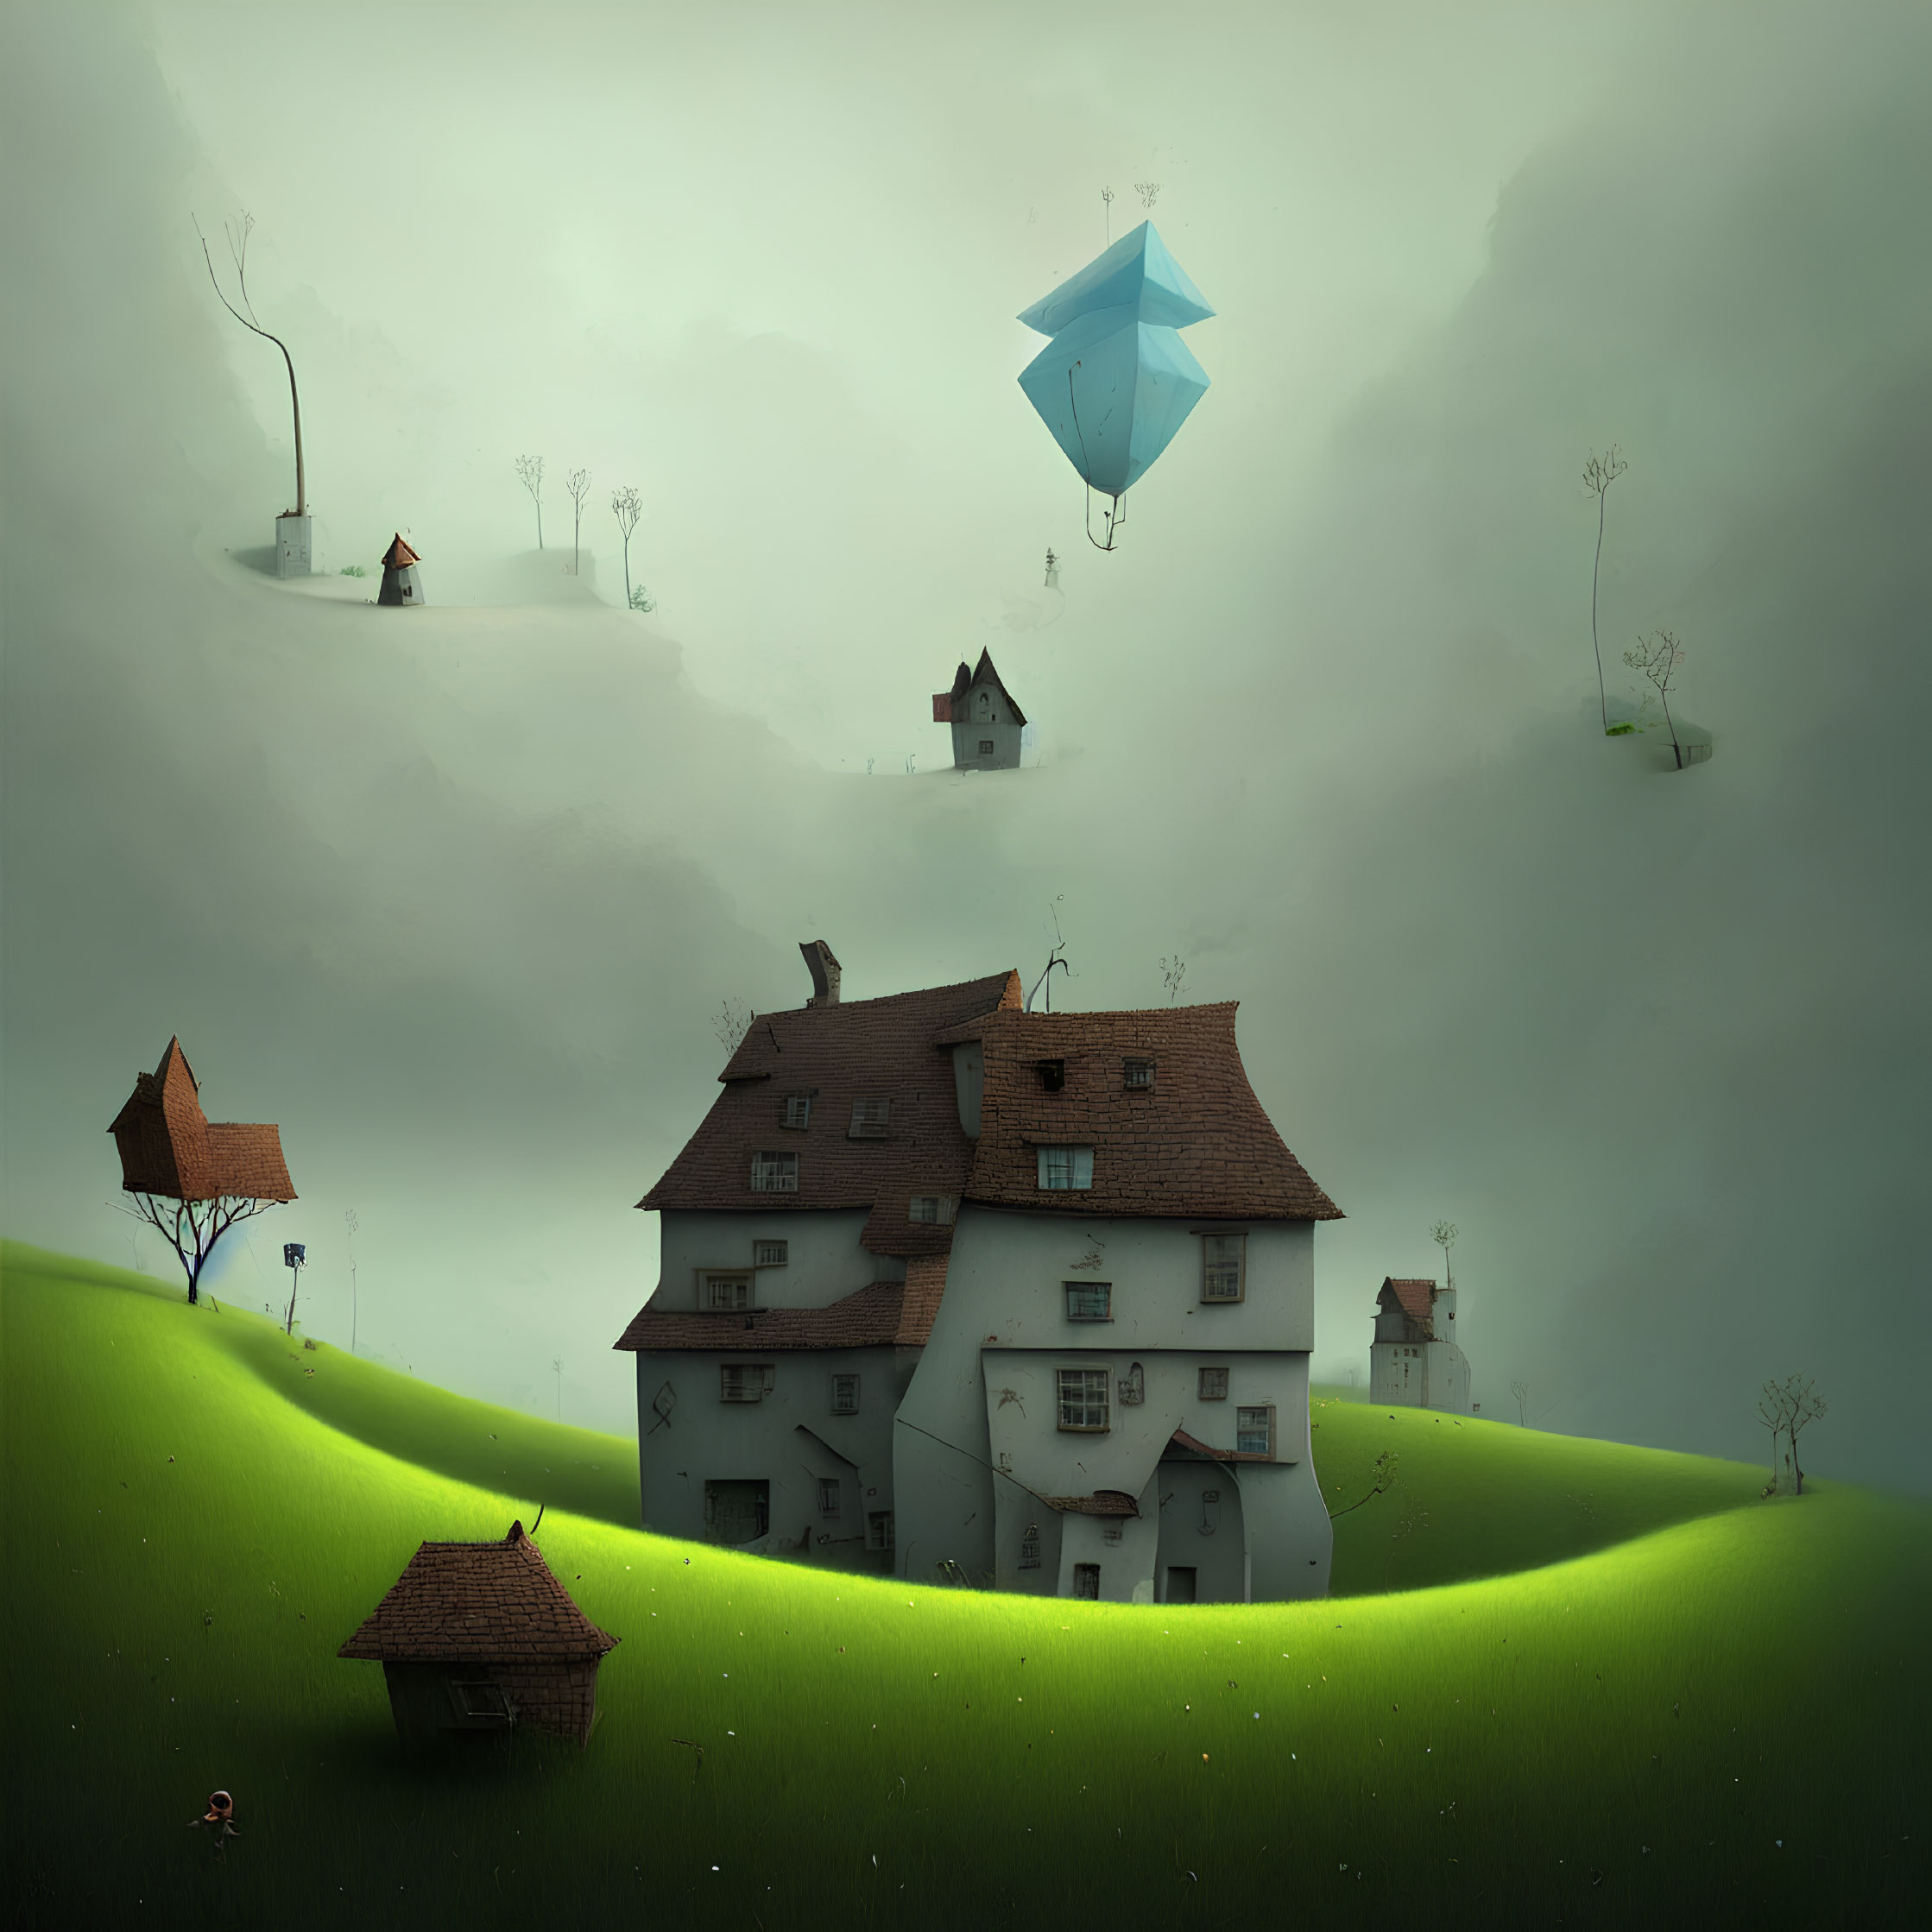 Surreal landscape with floating blue kite and oversized houses on green hills